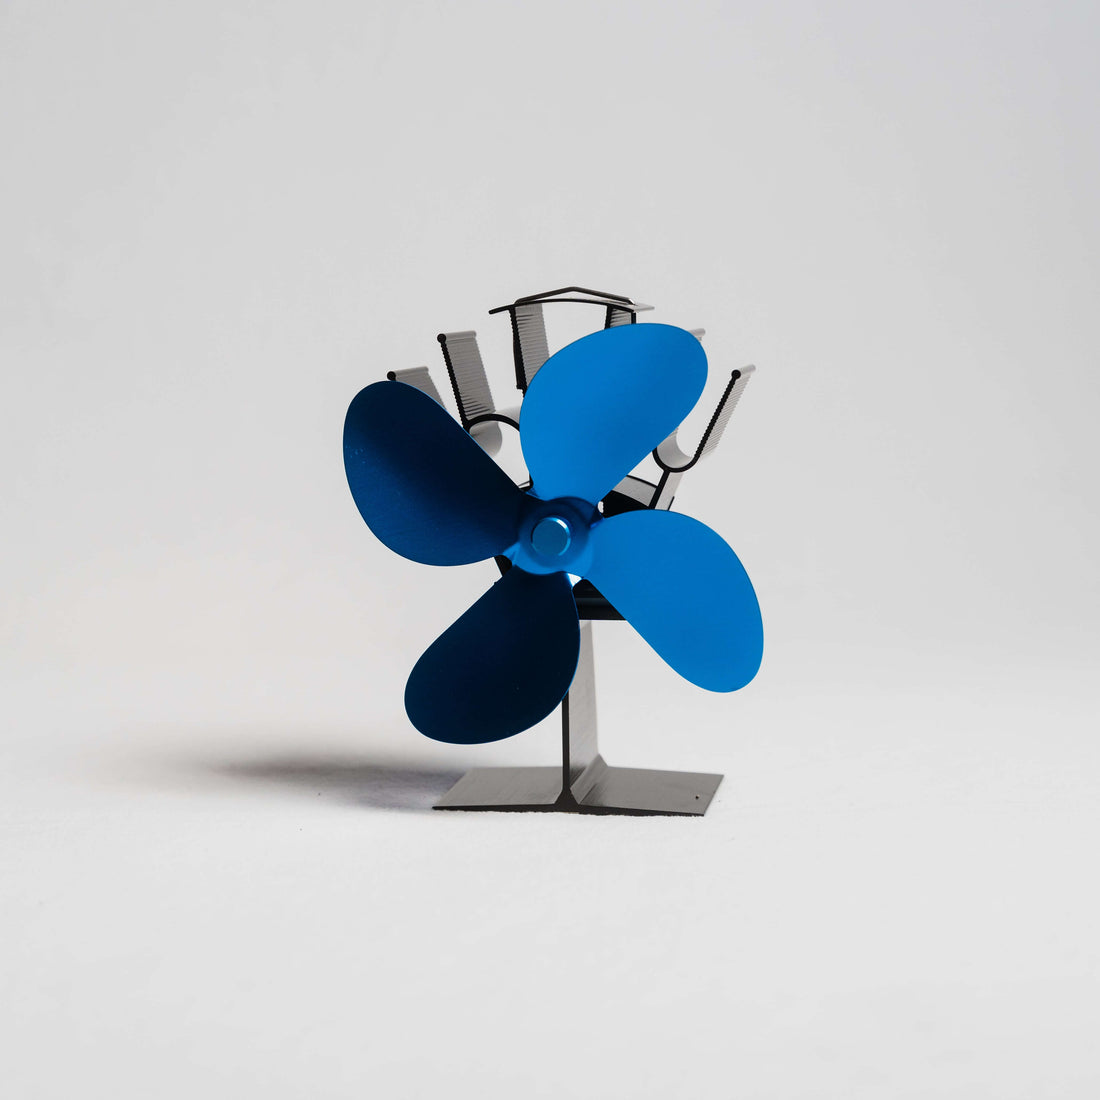 blue thermal electric fan with silver base support